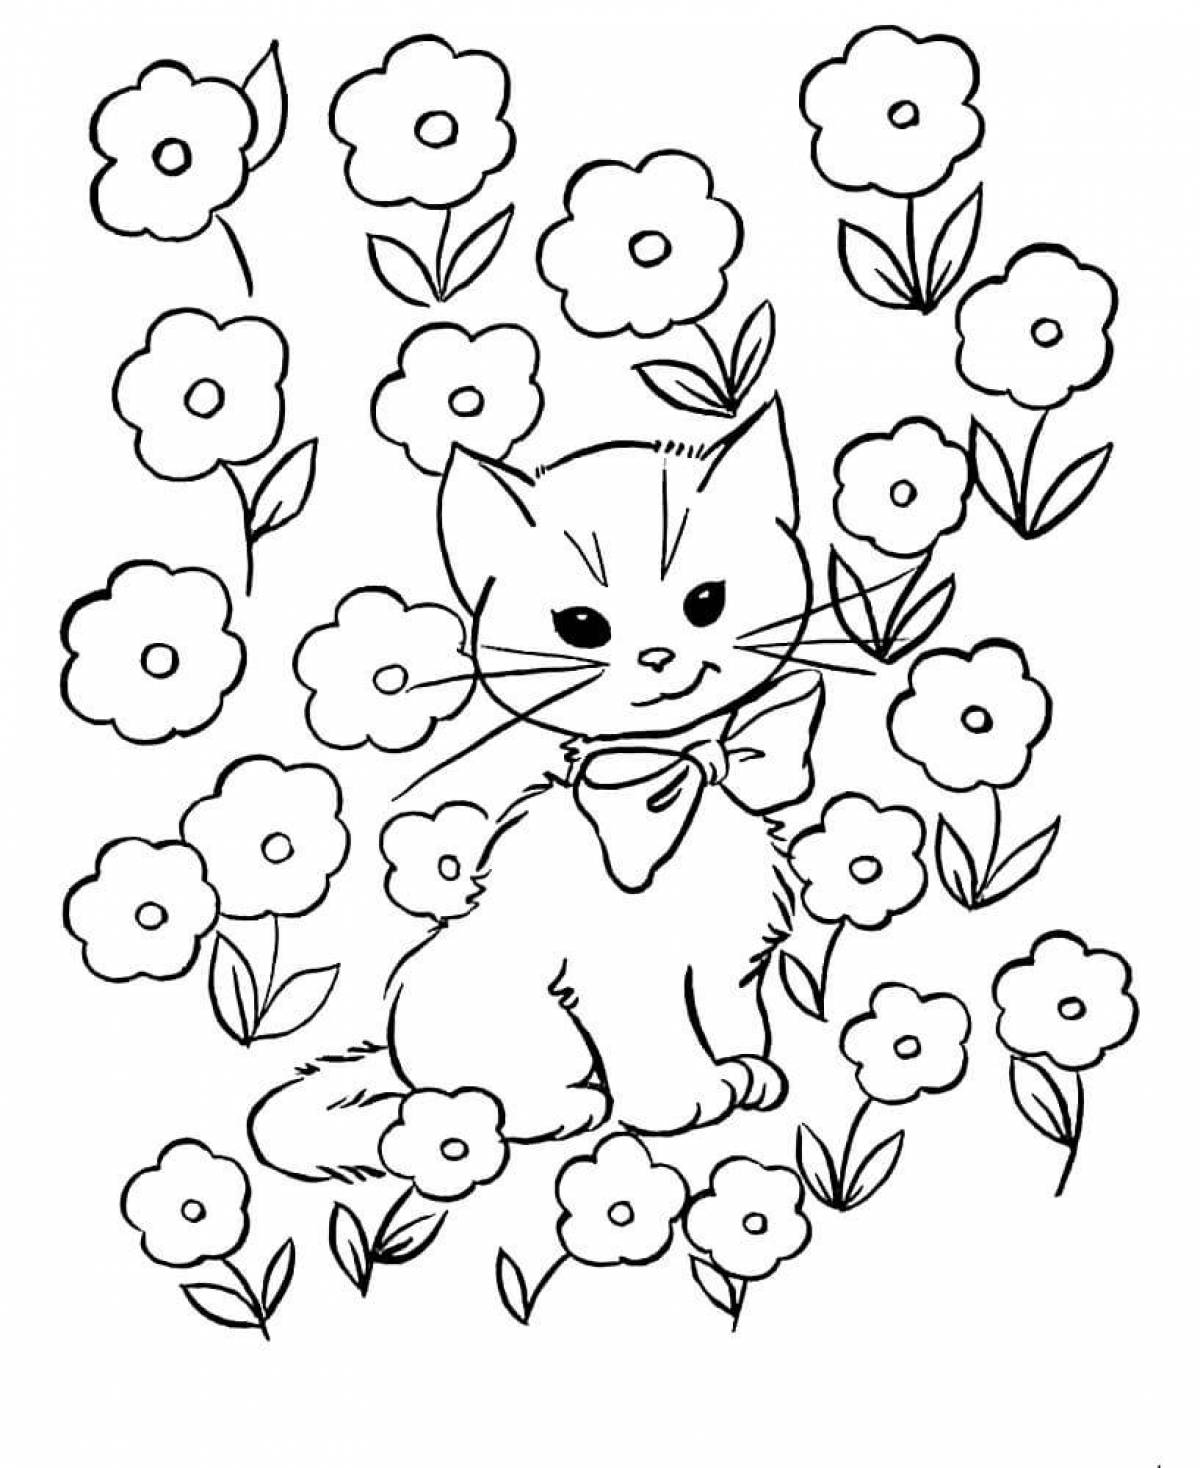 Exciting kitty coloring book